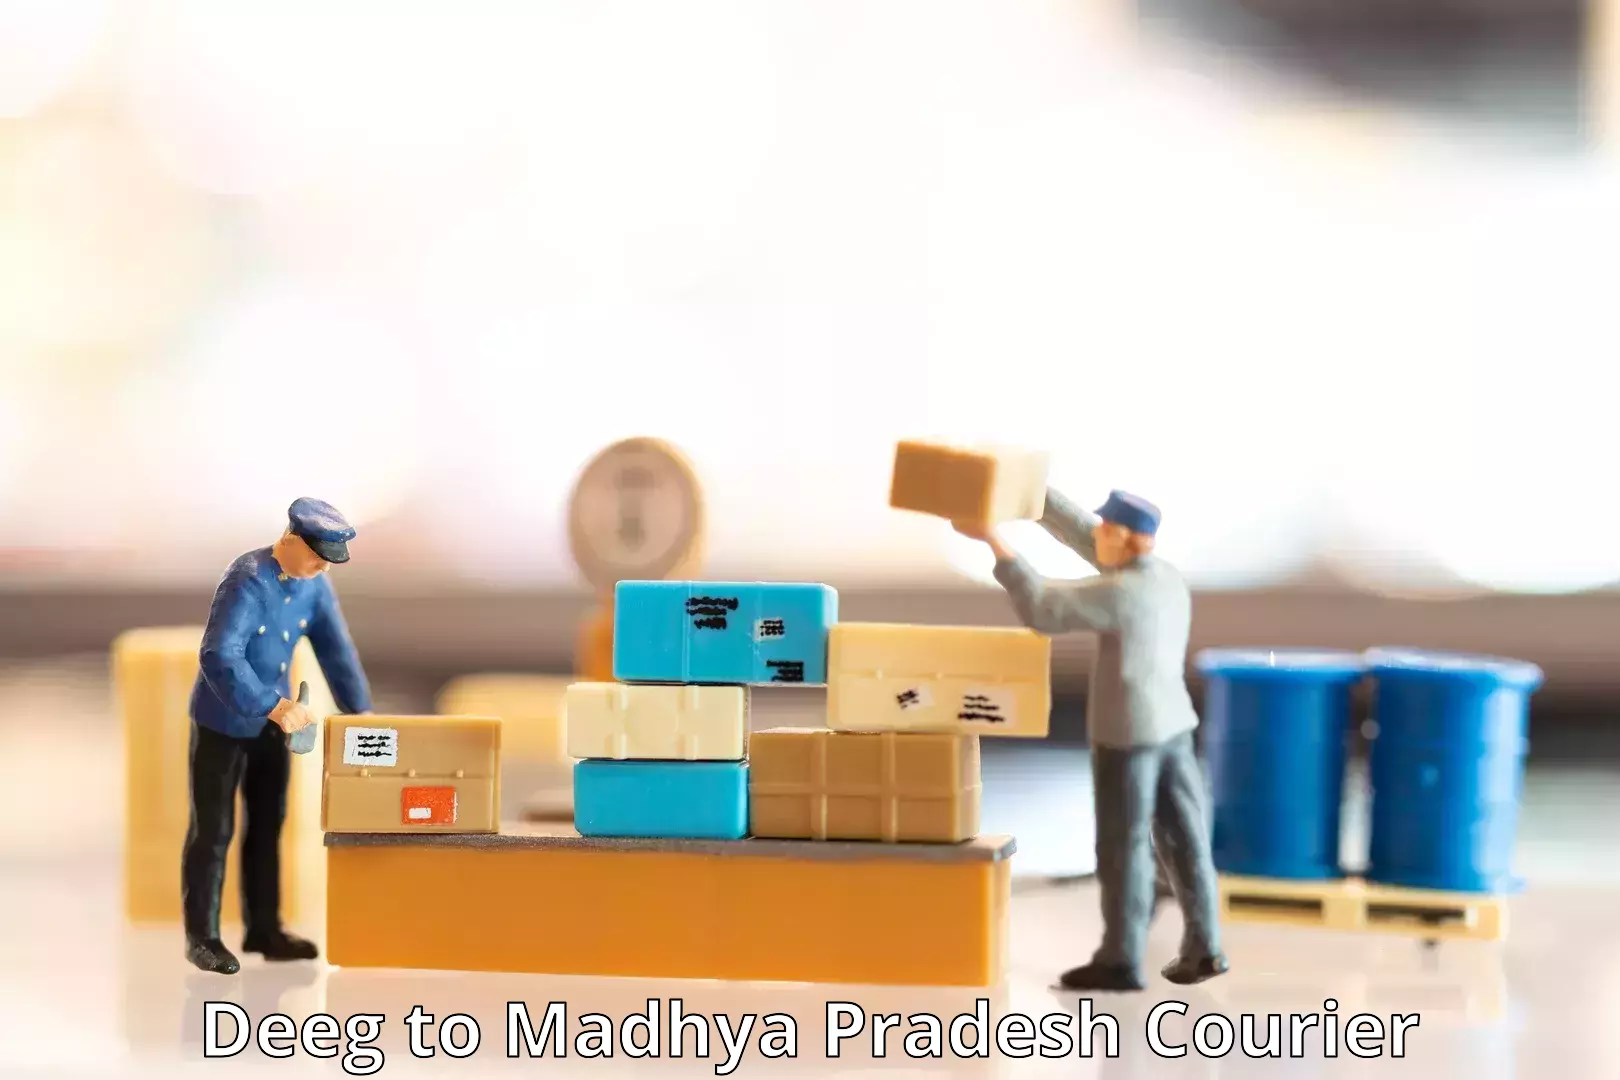 Large package courier Deeg to Madhya Pradesh